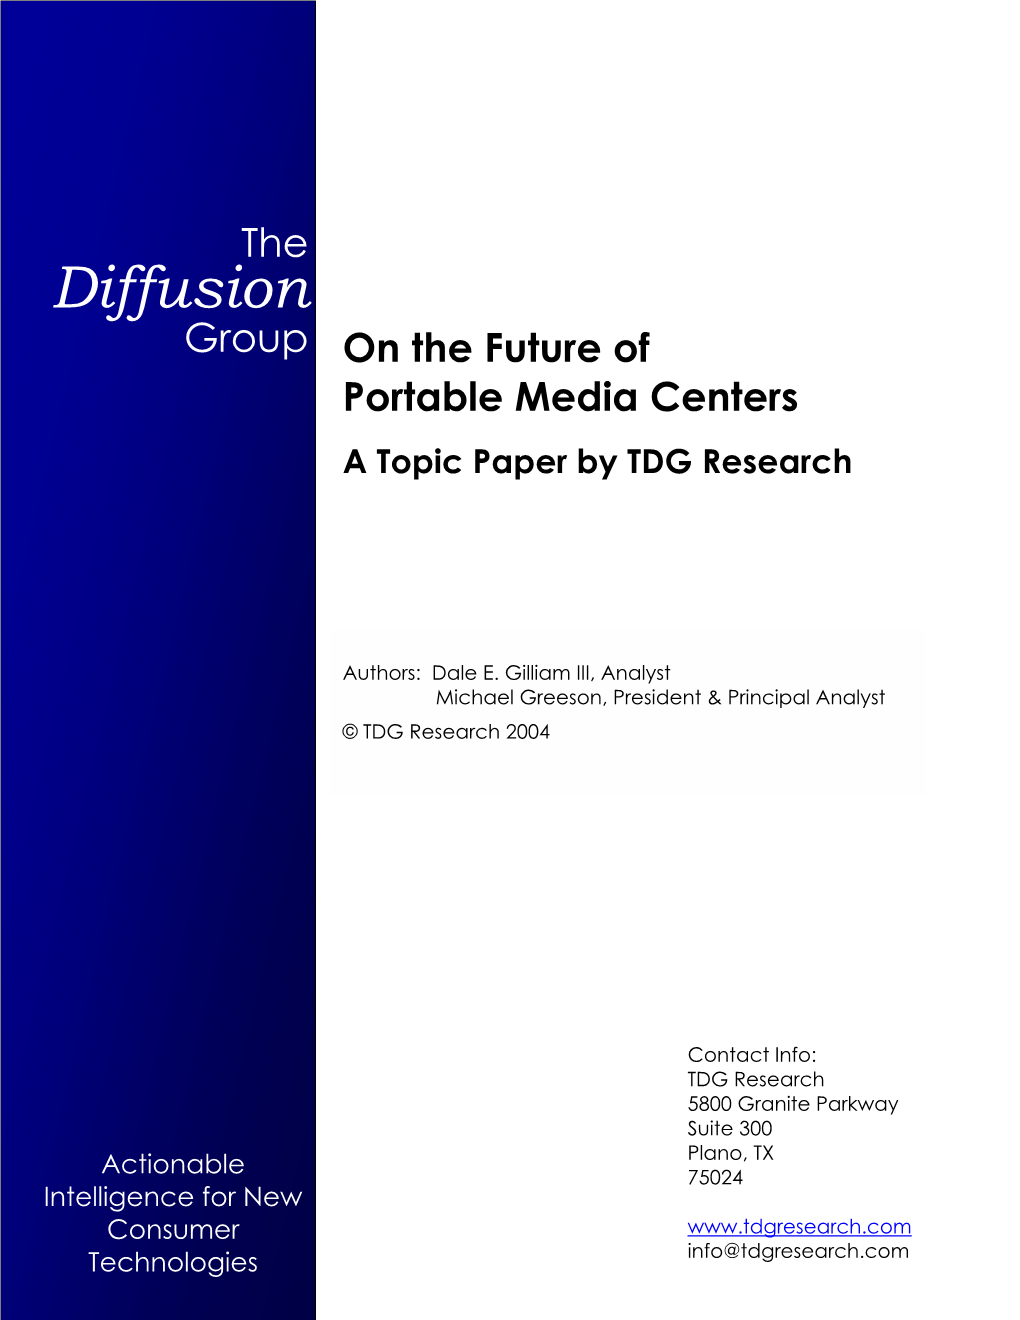 On the Future of Portable Media Centers a Topic Paper by TDG Research